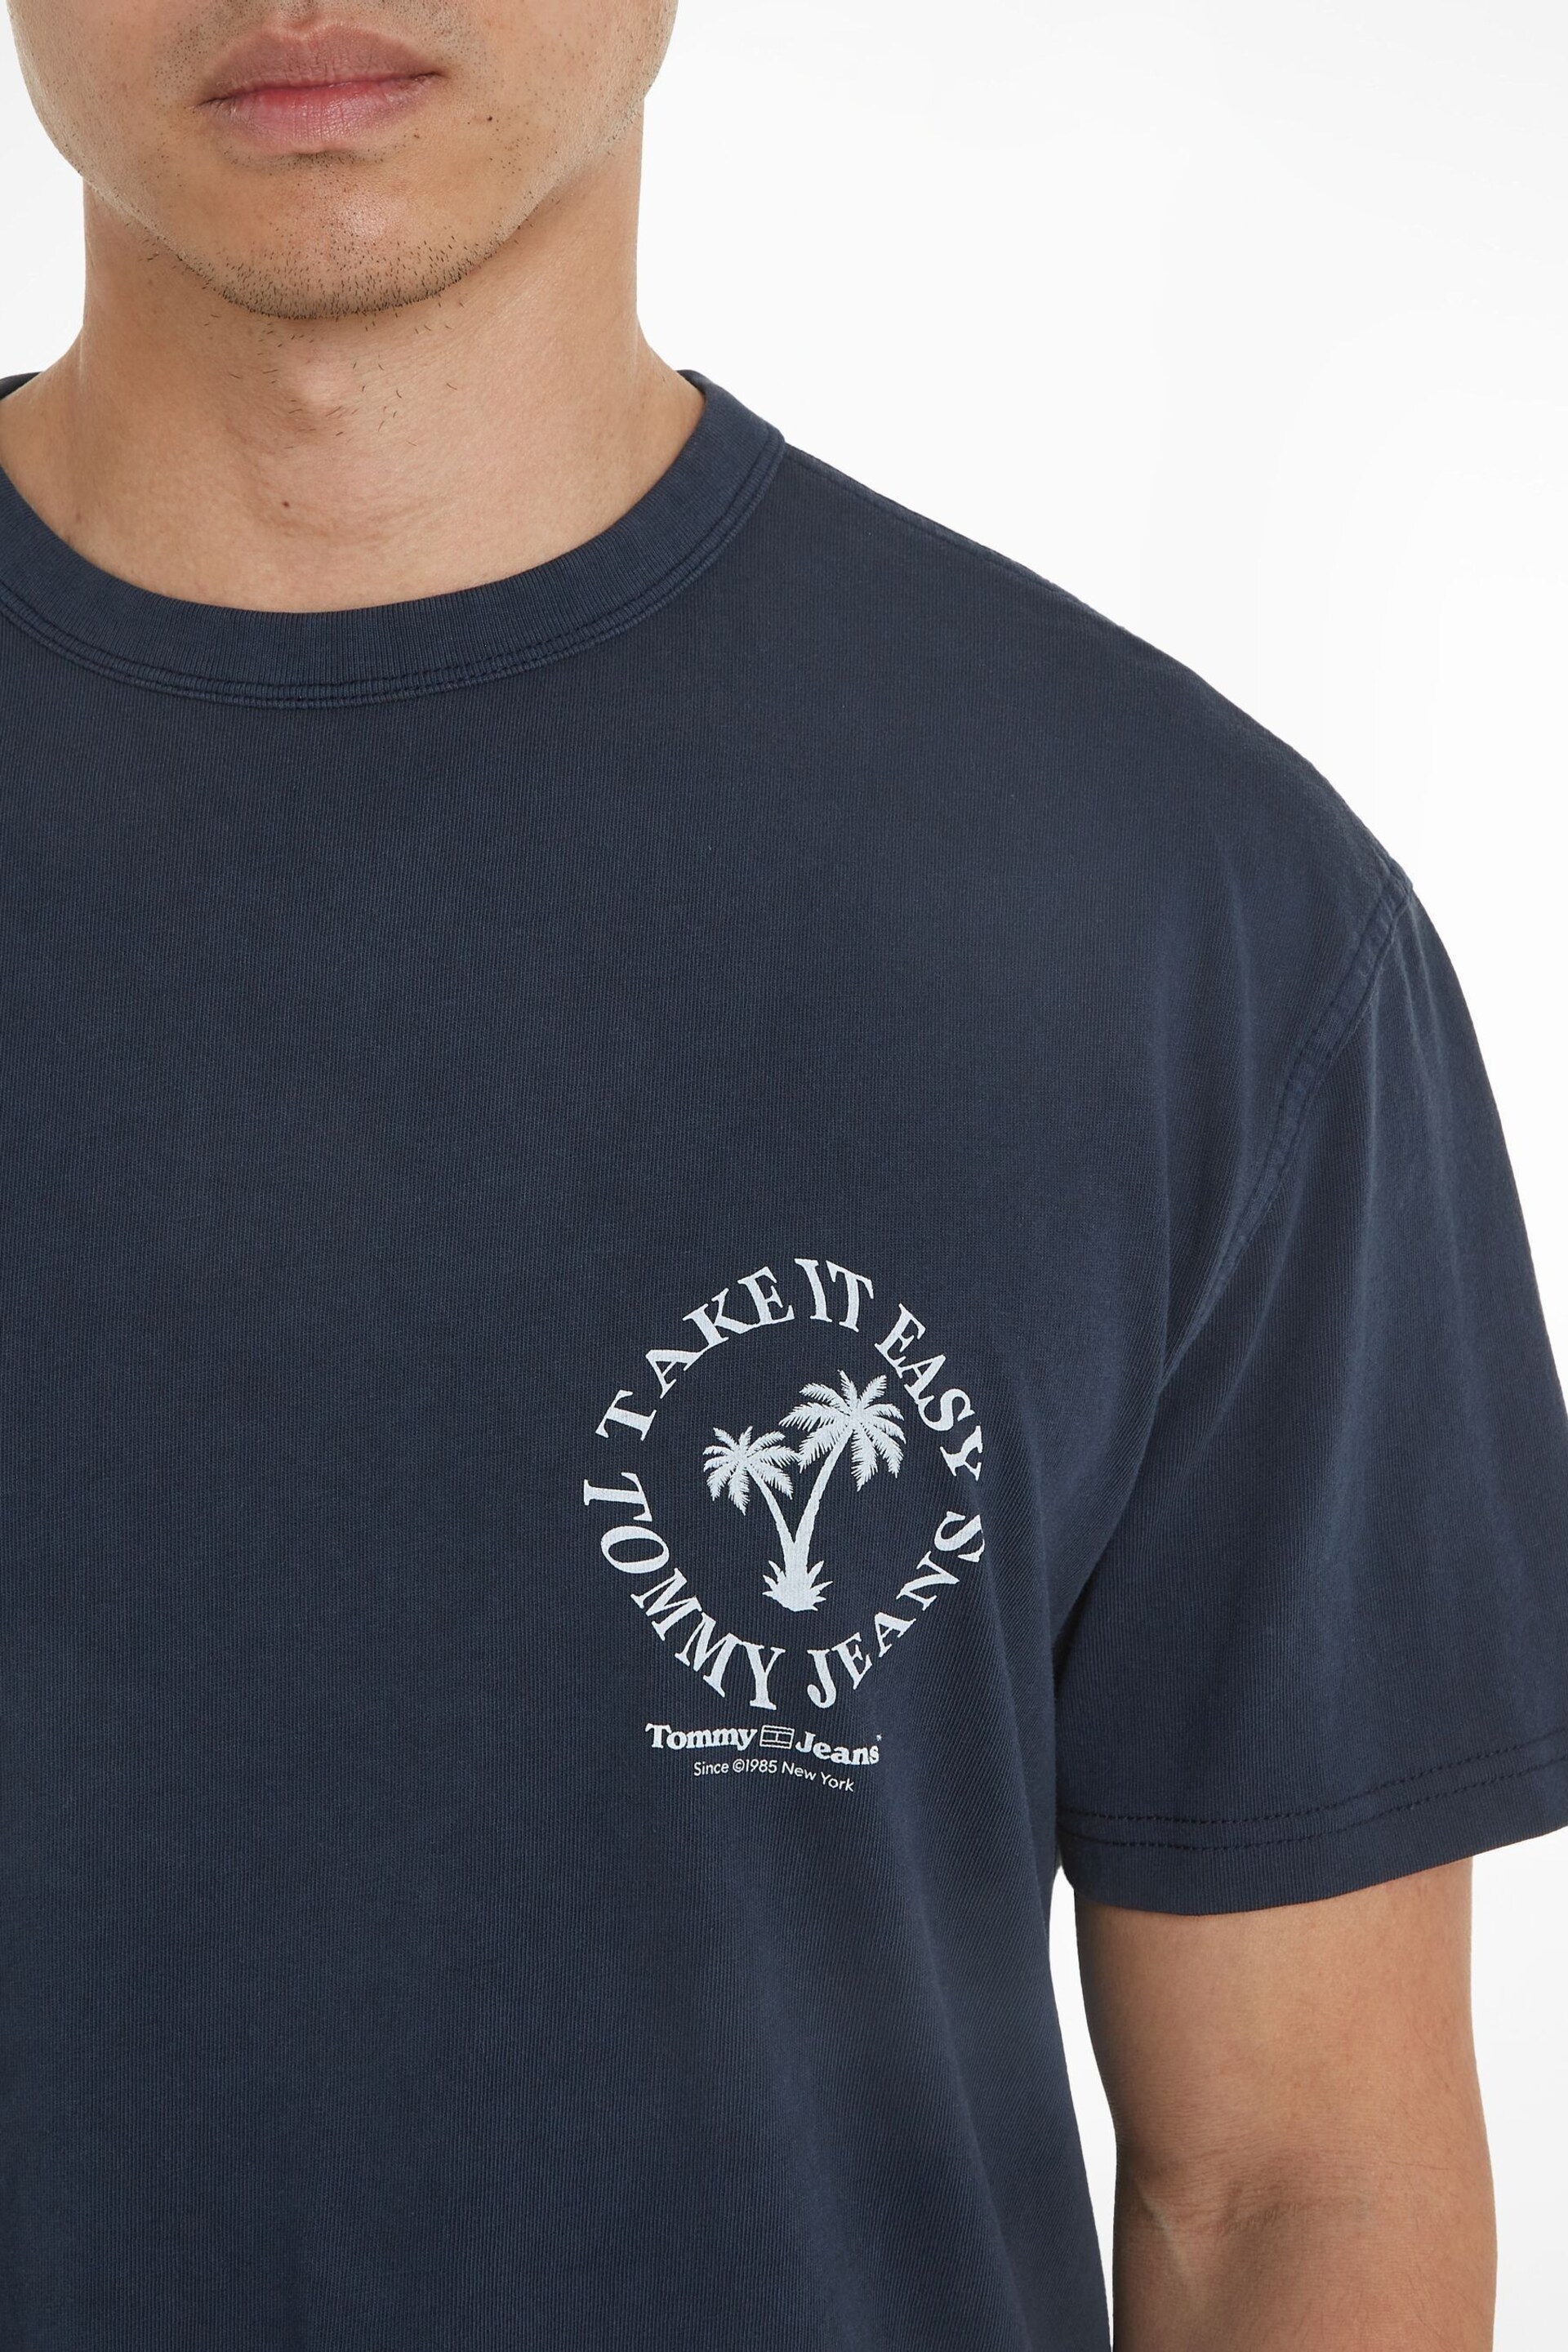 Tommy Jeans Blue Novelty Graphic T-Shirt - Image 3 of 6